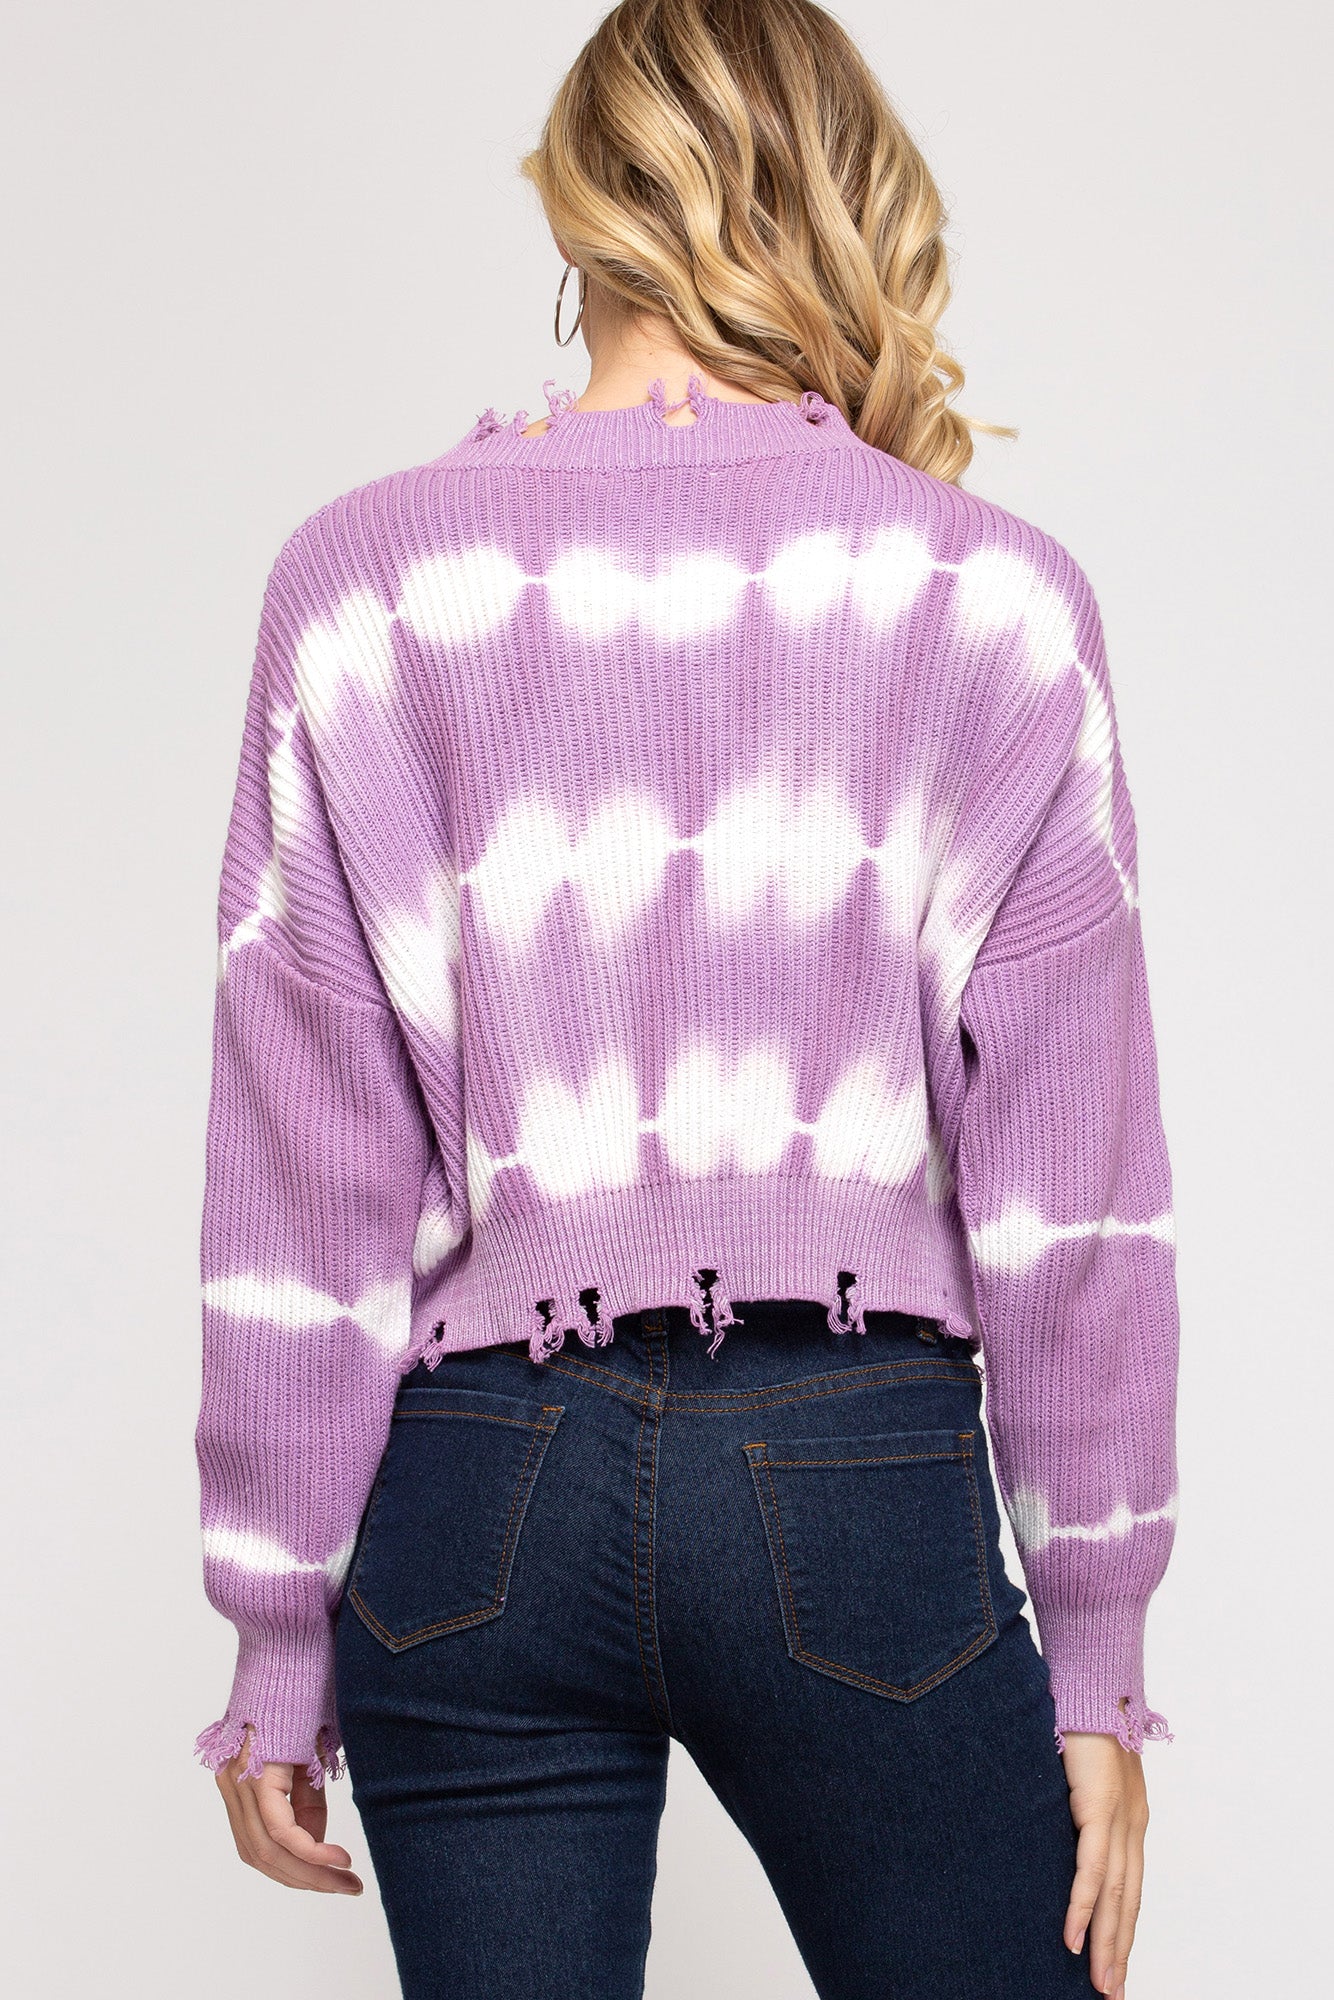 Tie-Dye Pullover Distressed Sweater!